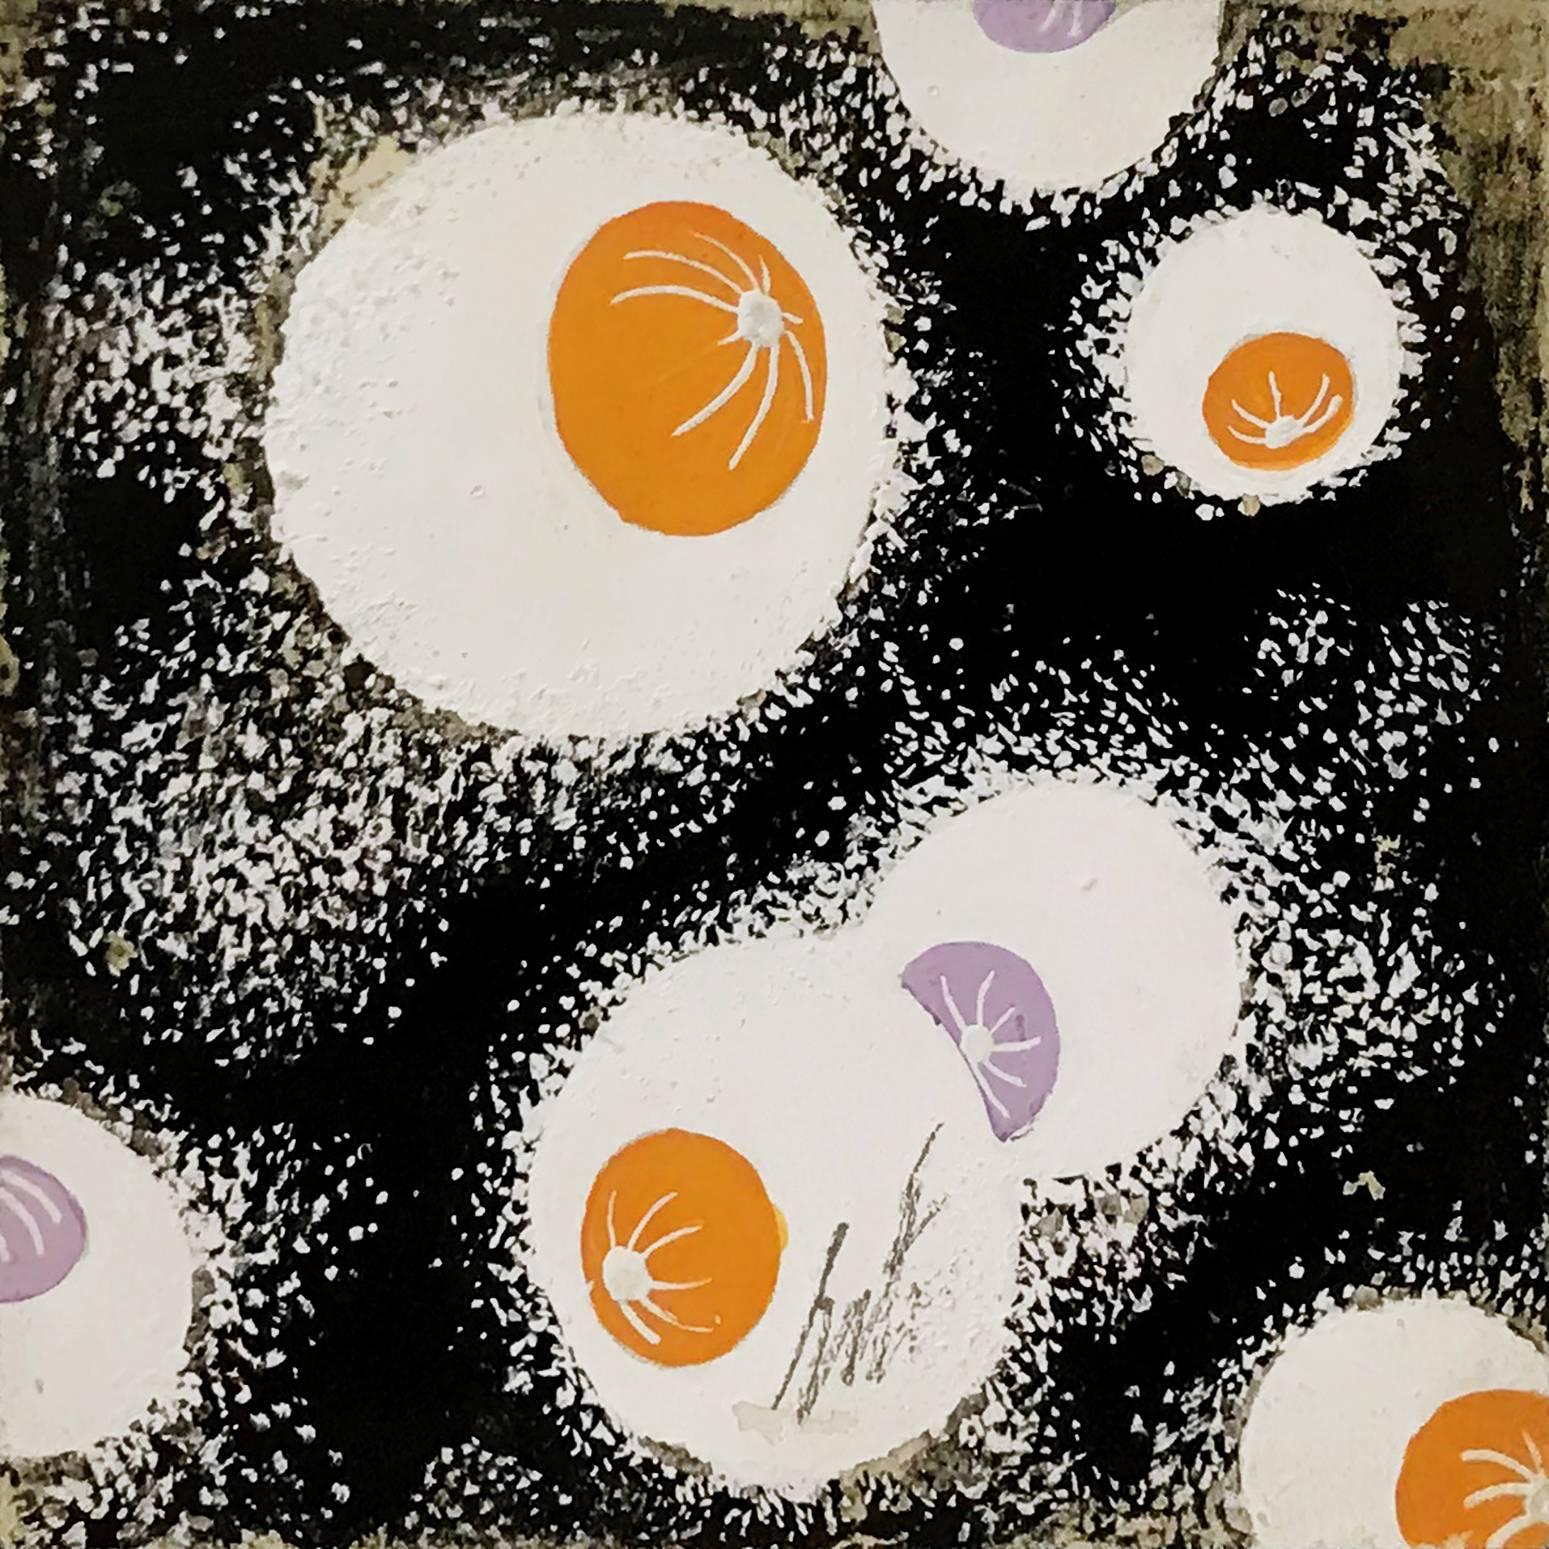 Erté Abstract Drawing - DESIGN FOR FABRIC #7346